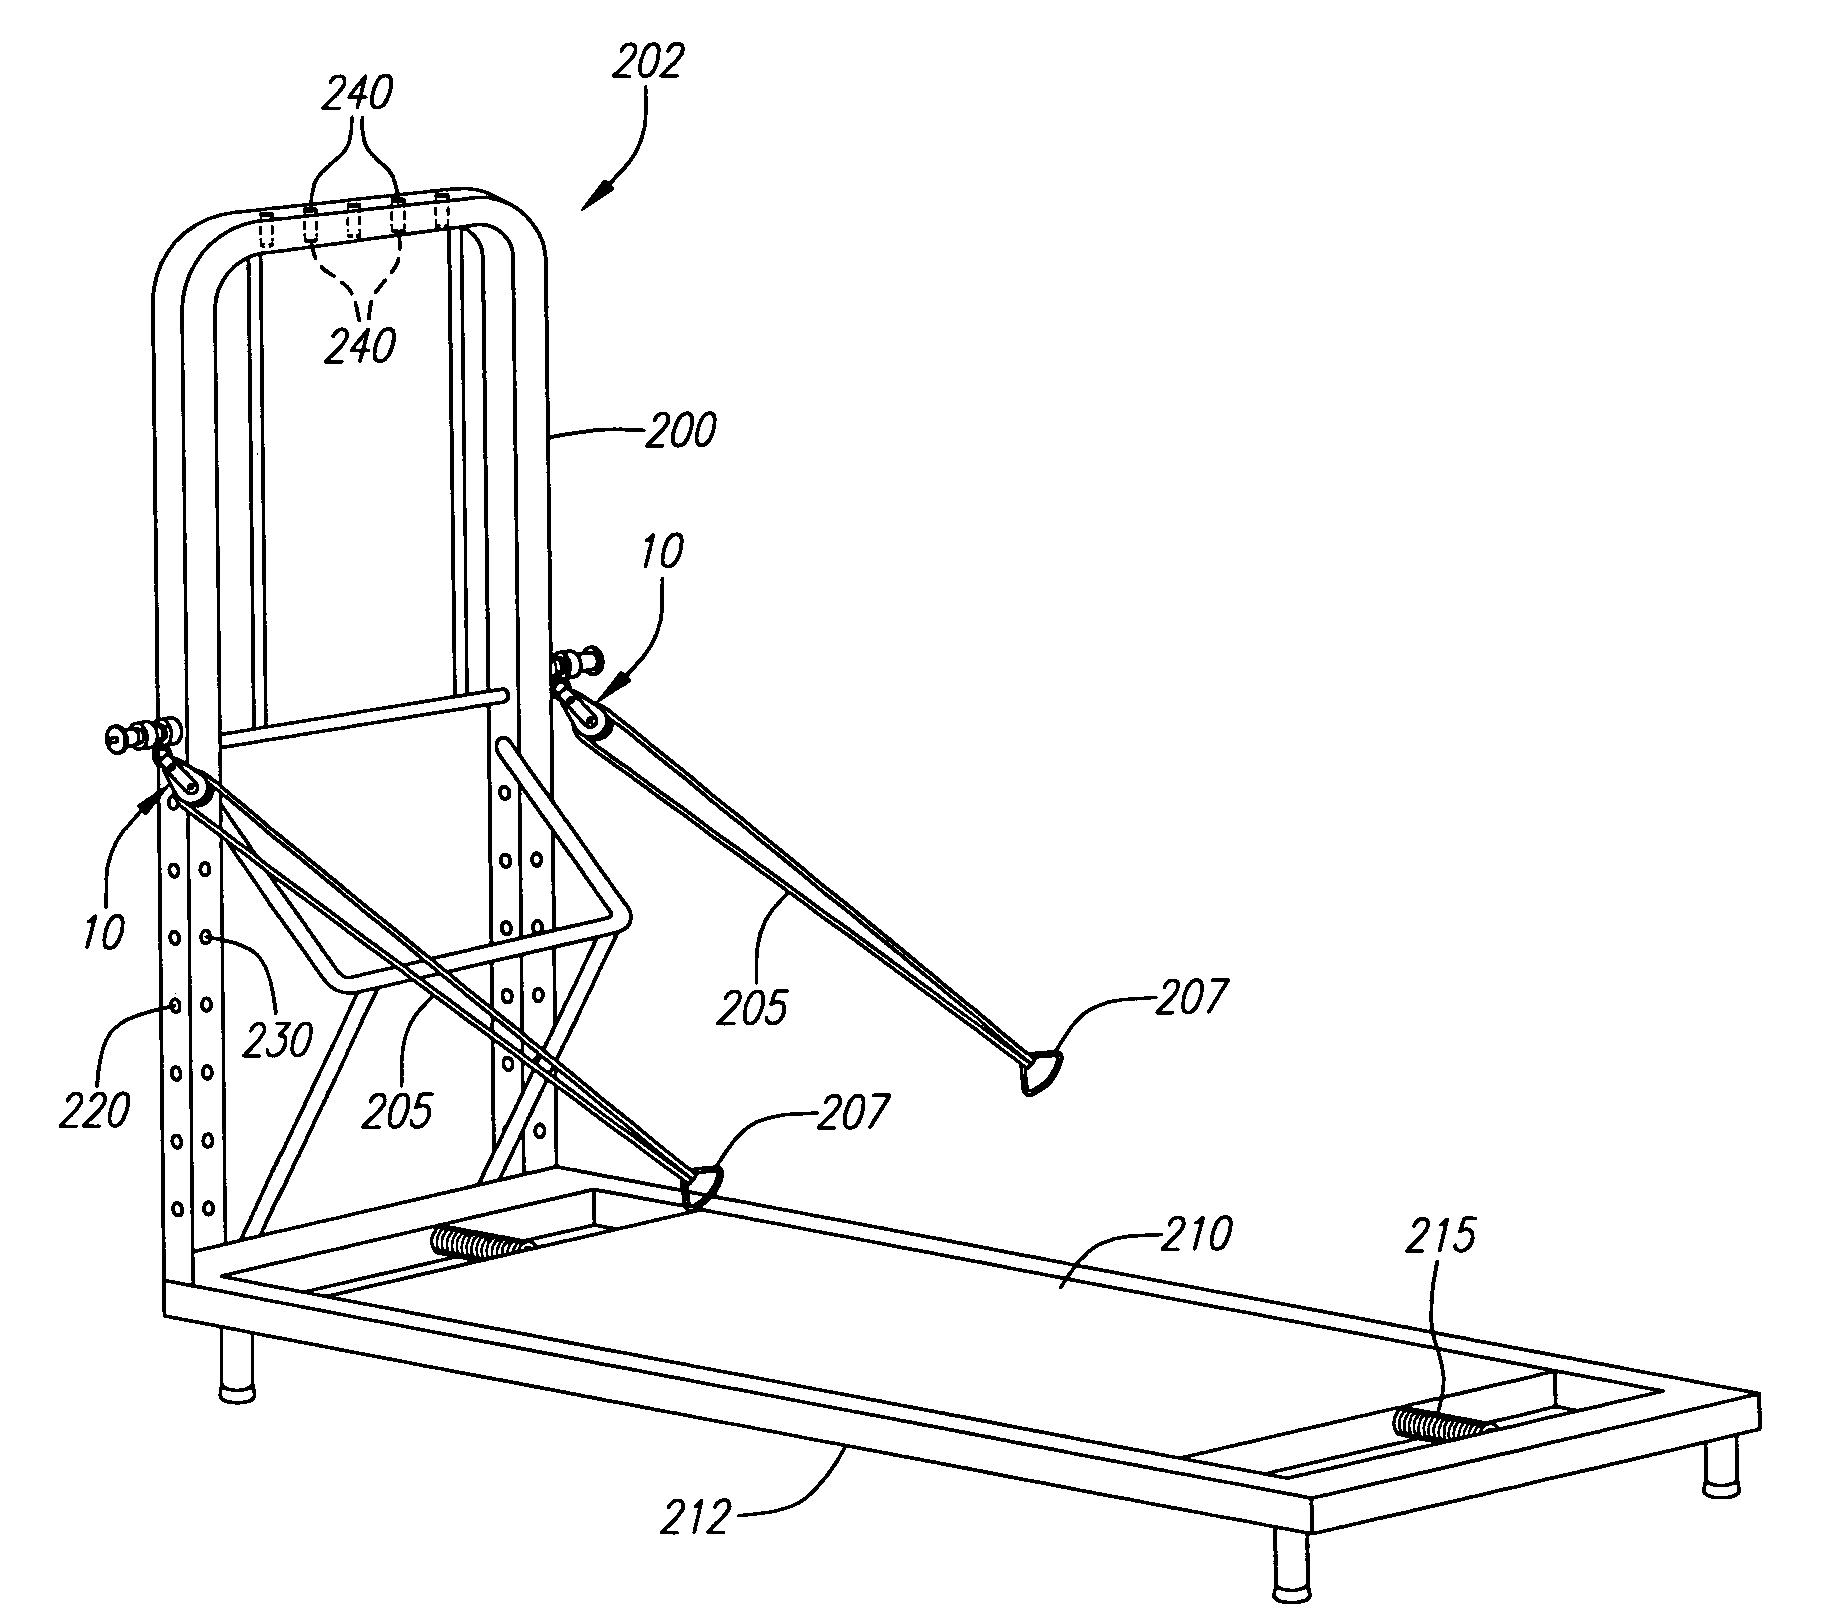 Adjustable mounting device for exercise equipment